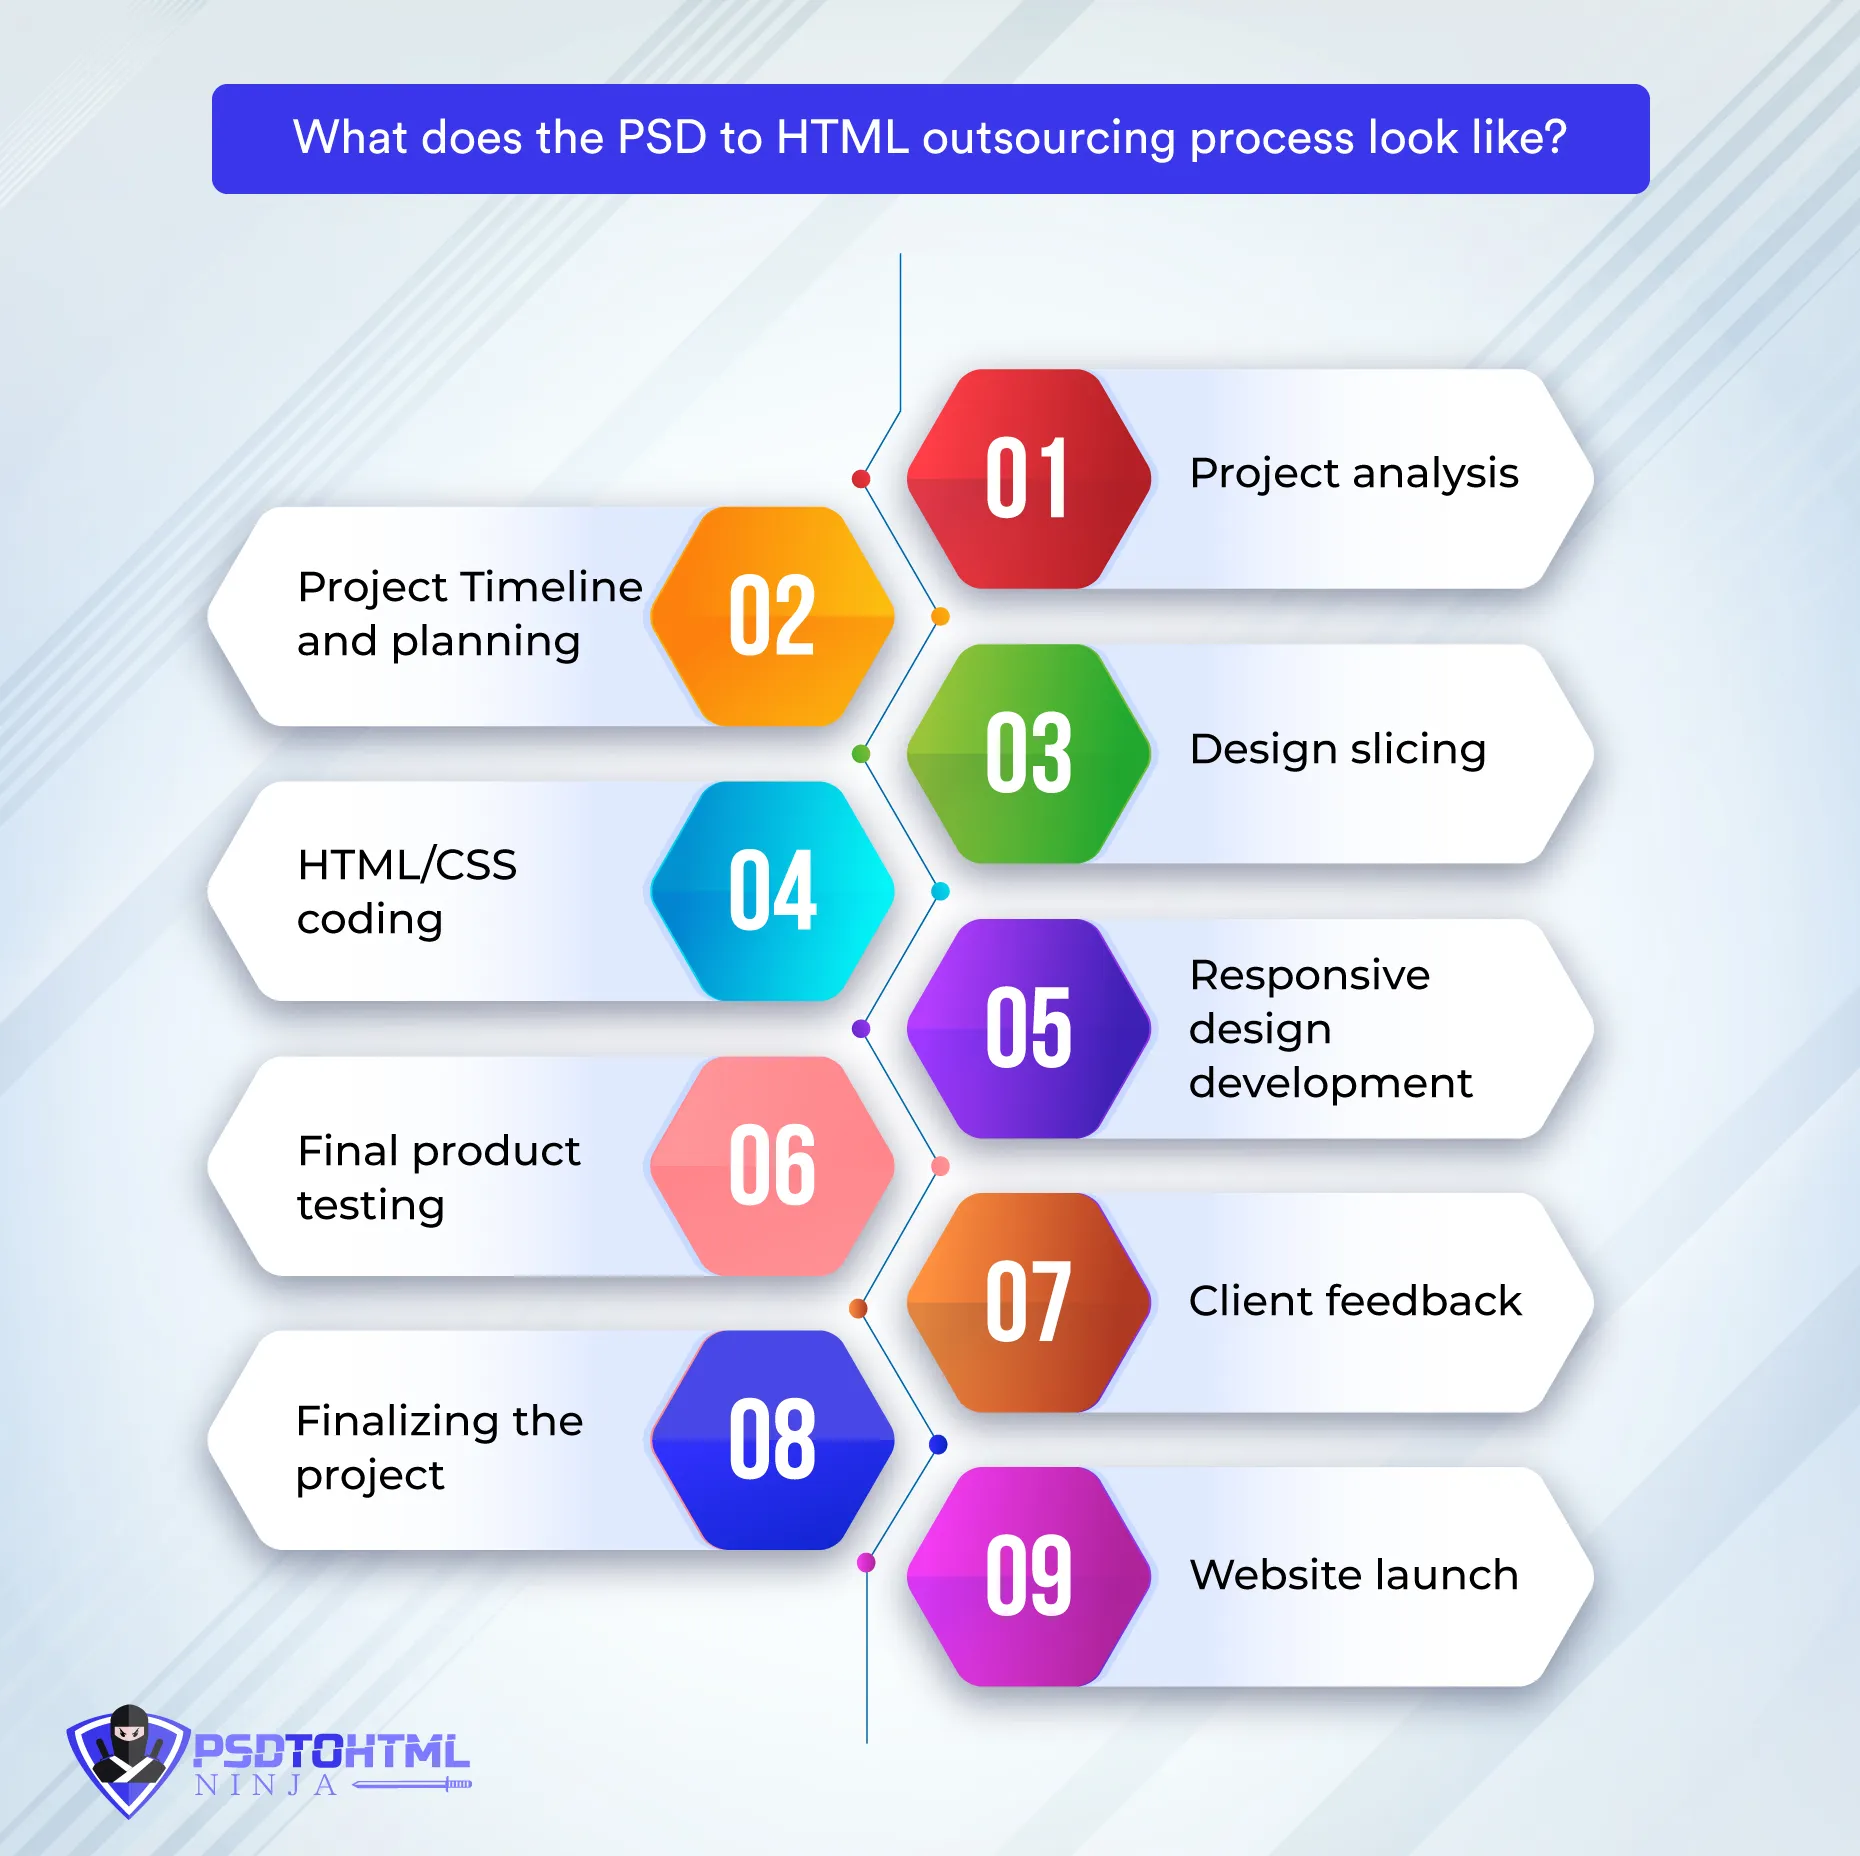 What does the PSD to HTML outsourcing process look like?